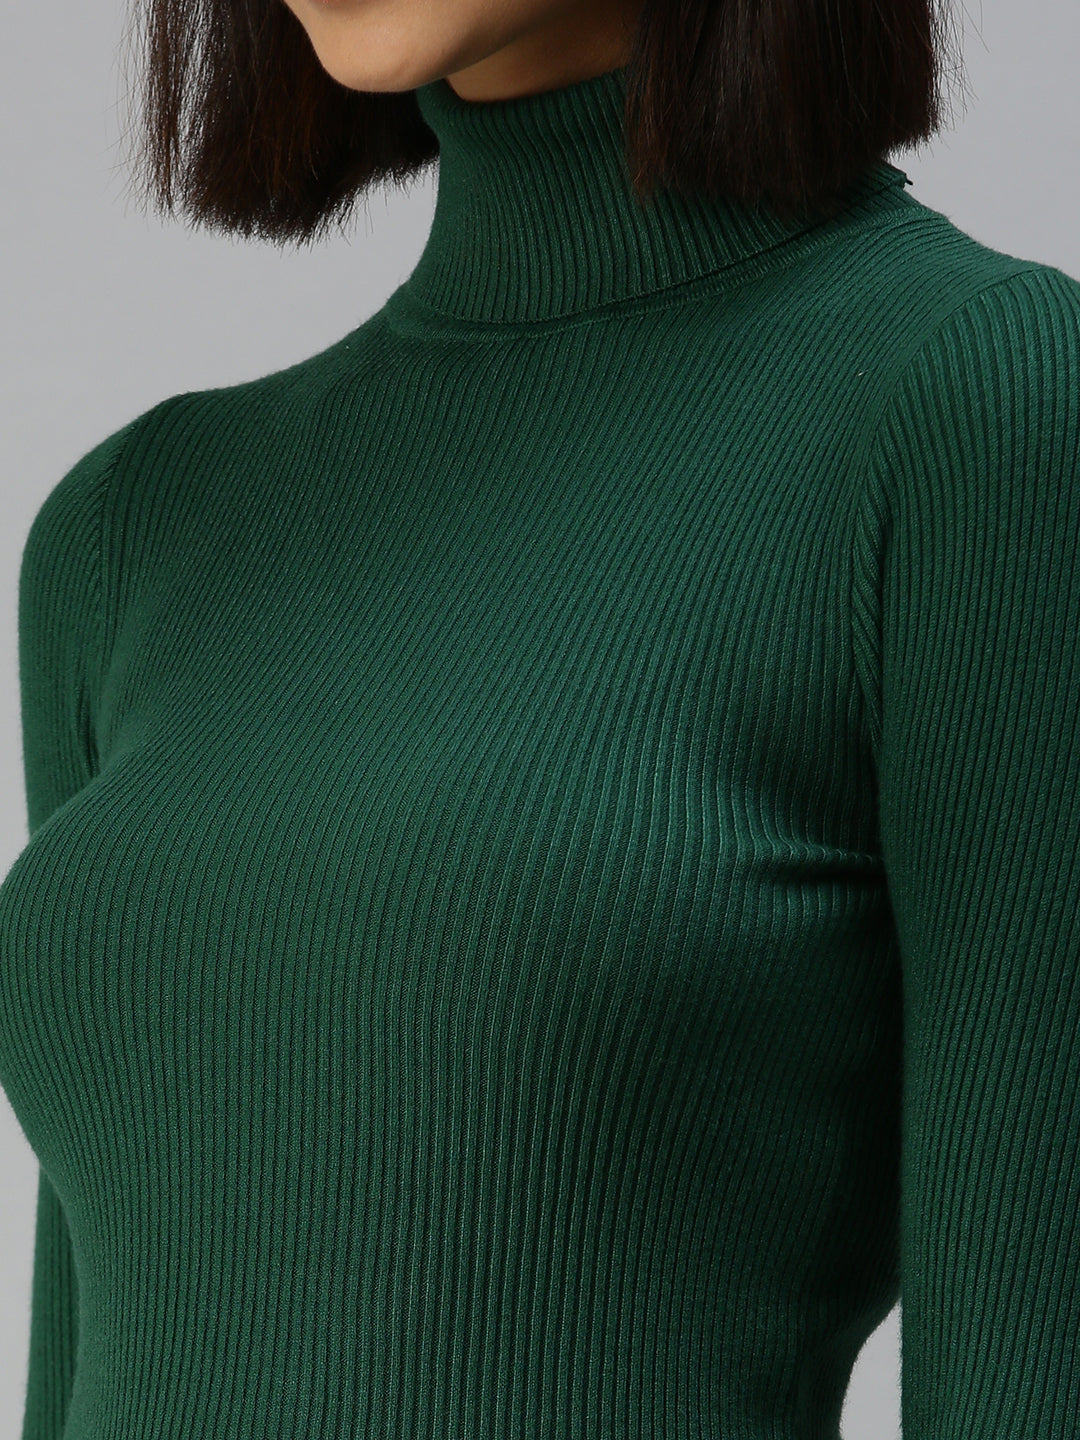 Women High Neck Solid Green Fitted Top